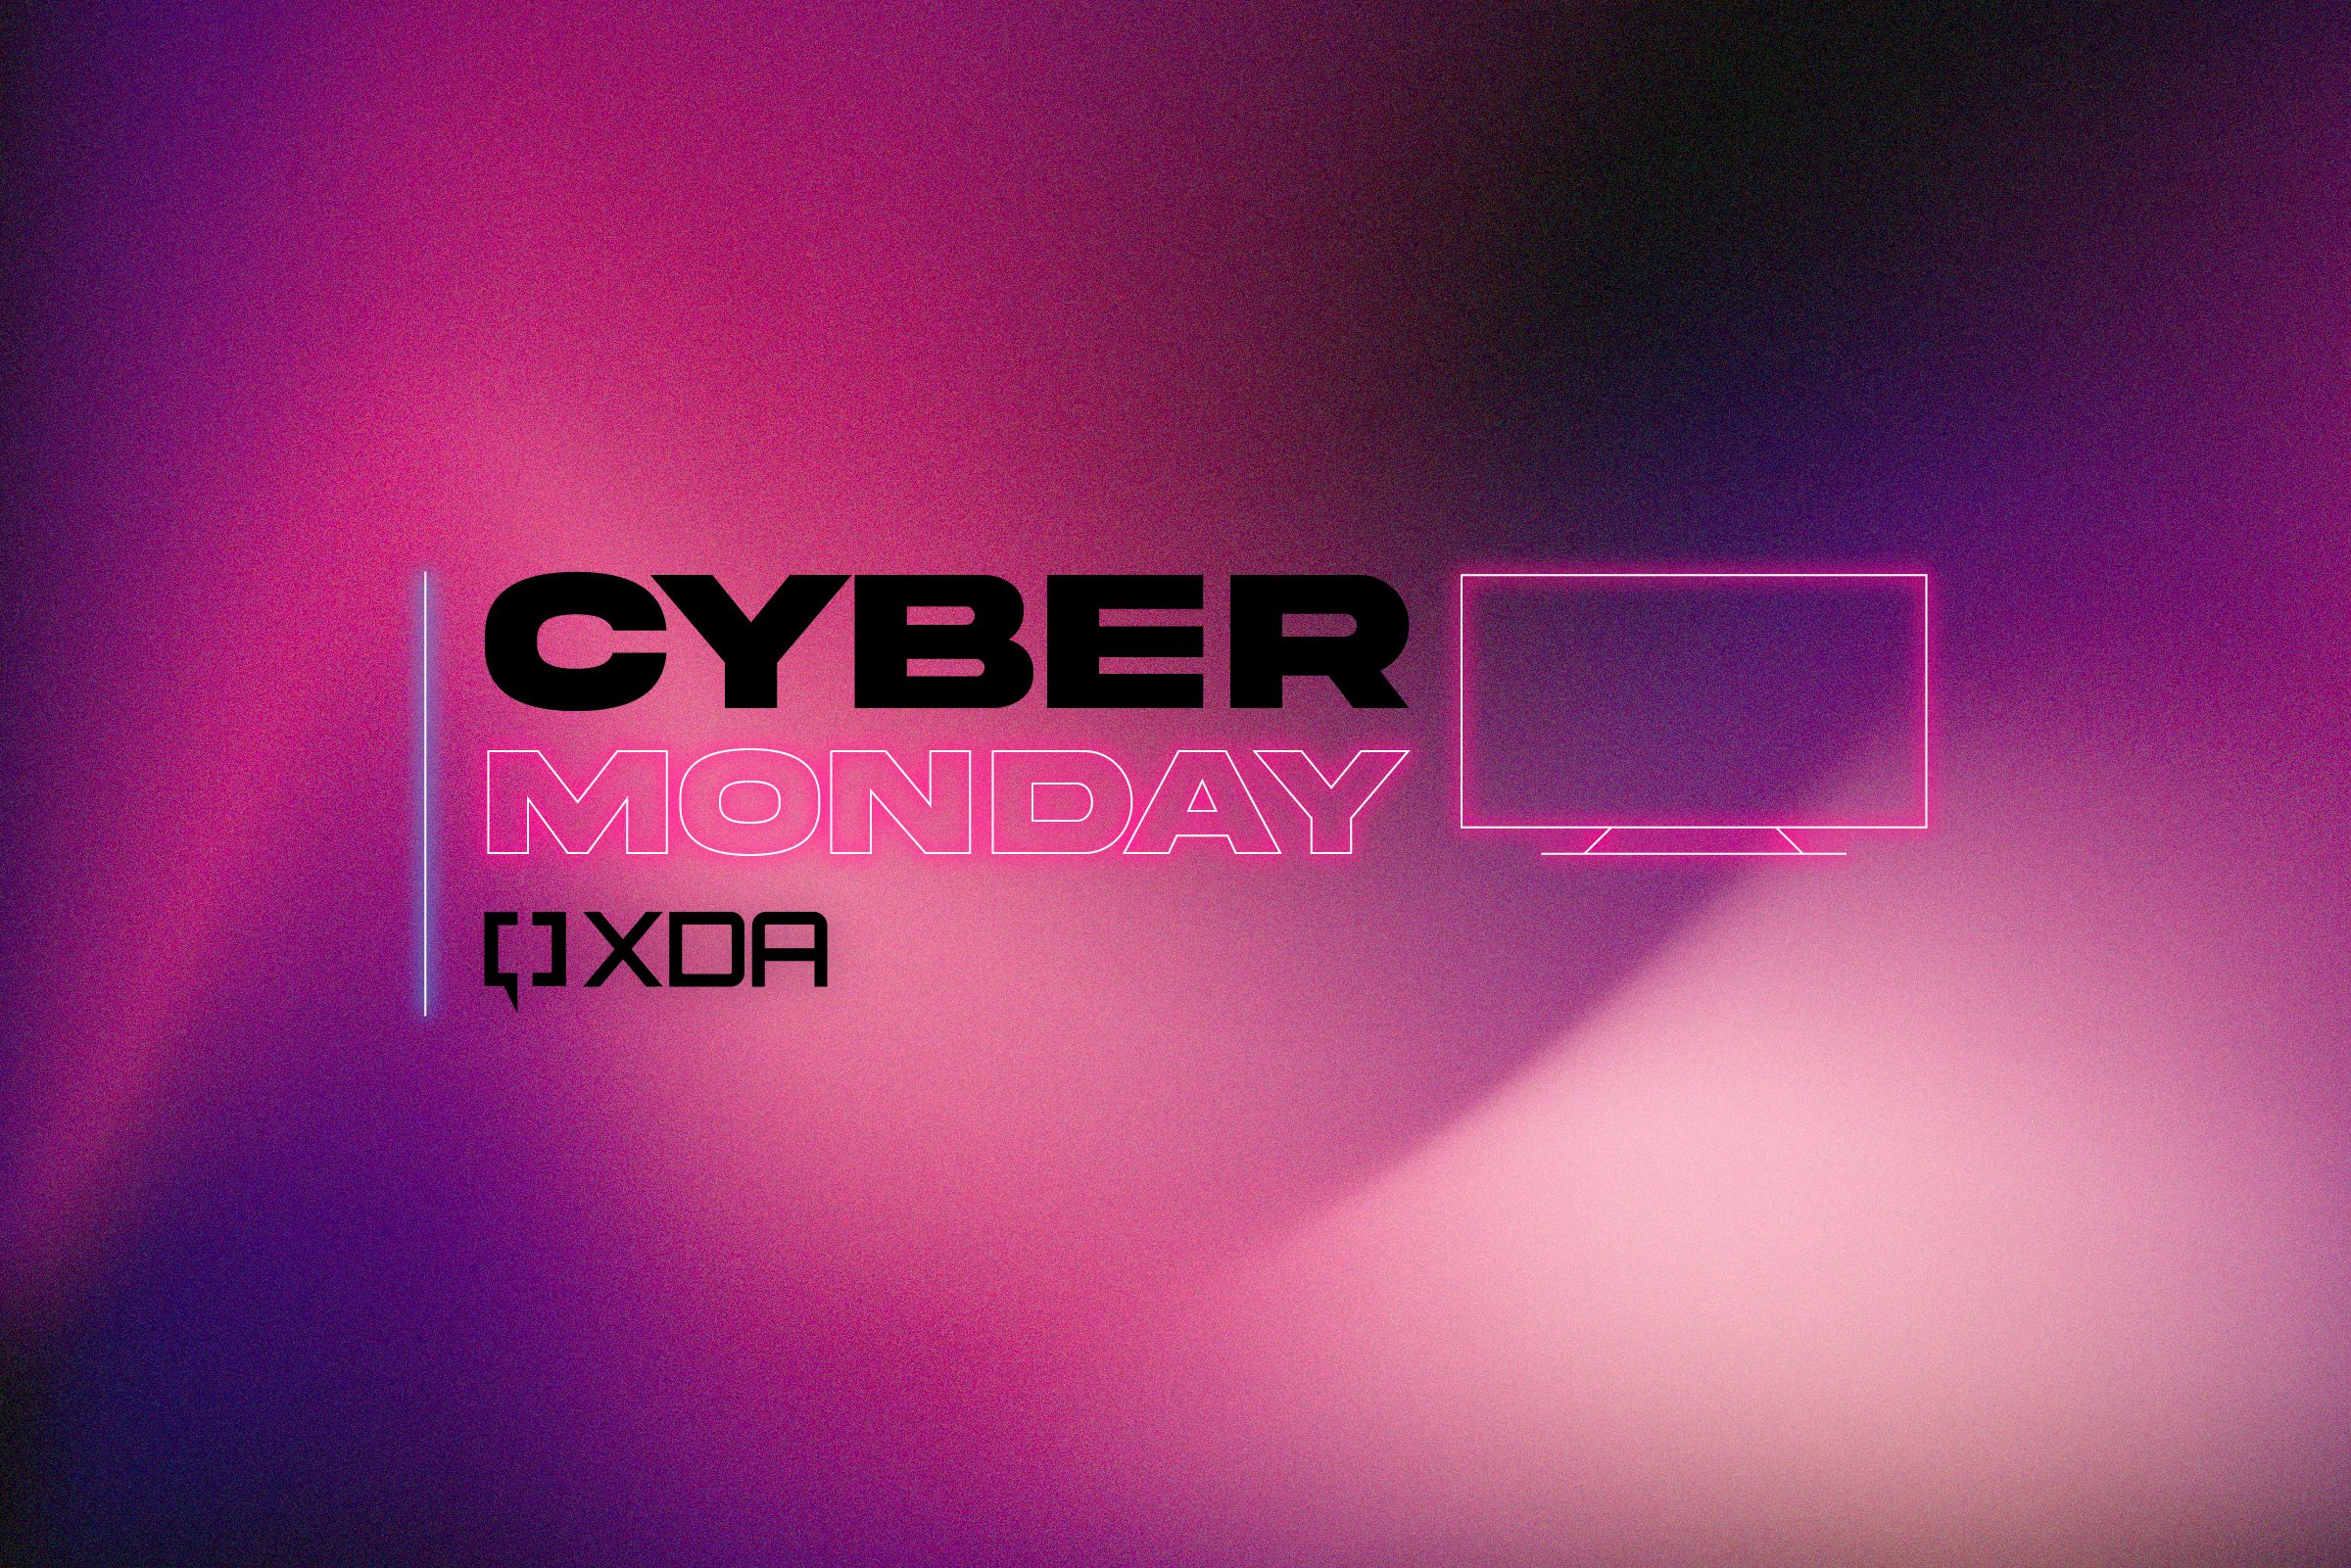 58 great Cyber Monday phone, tablet, and accessory deals